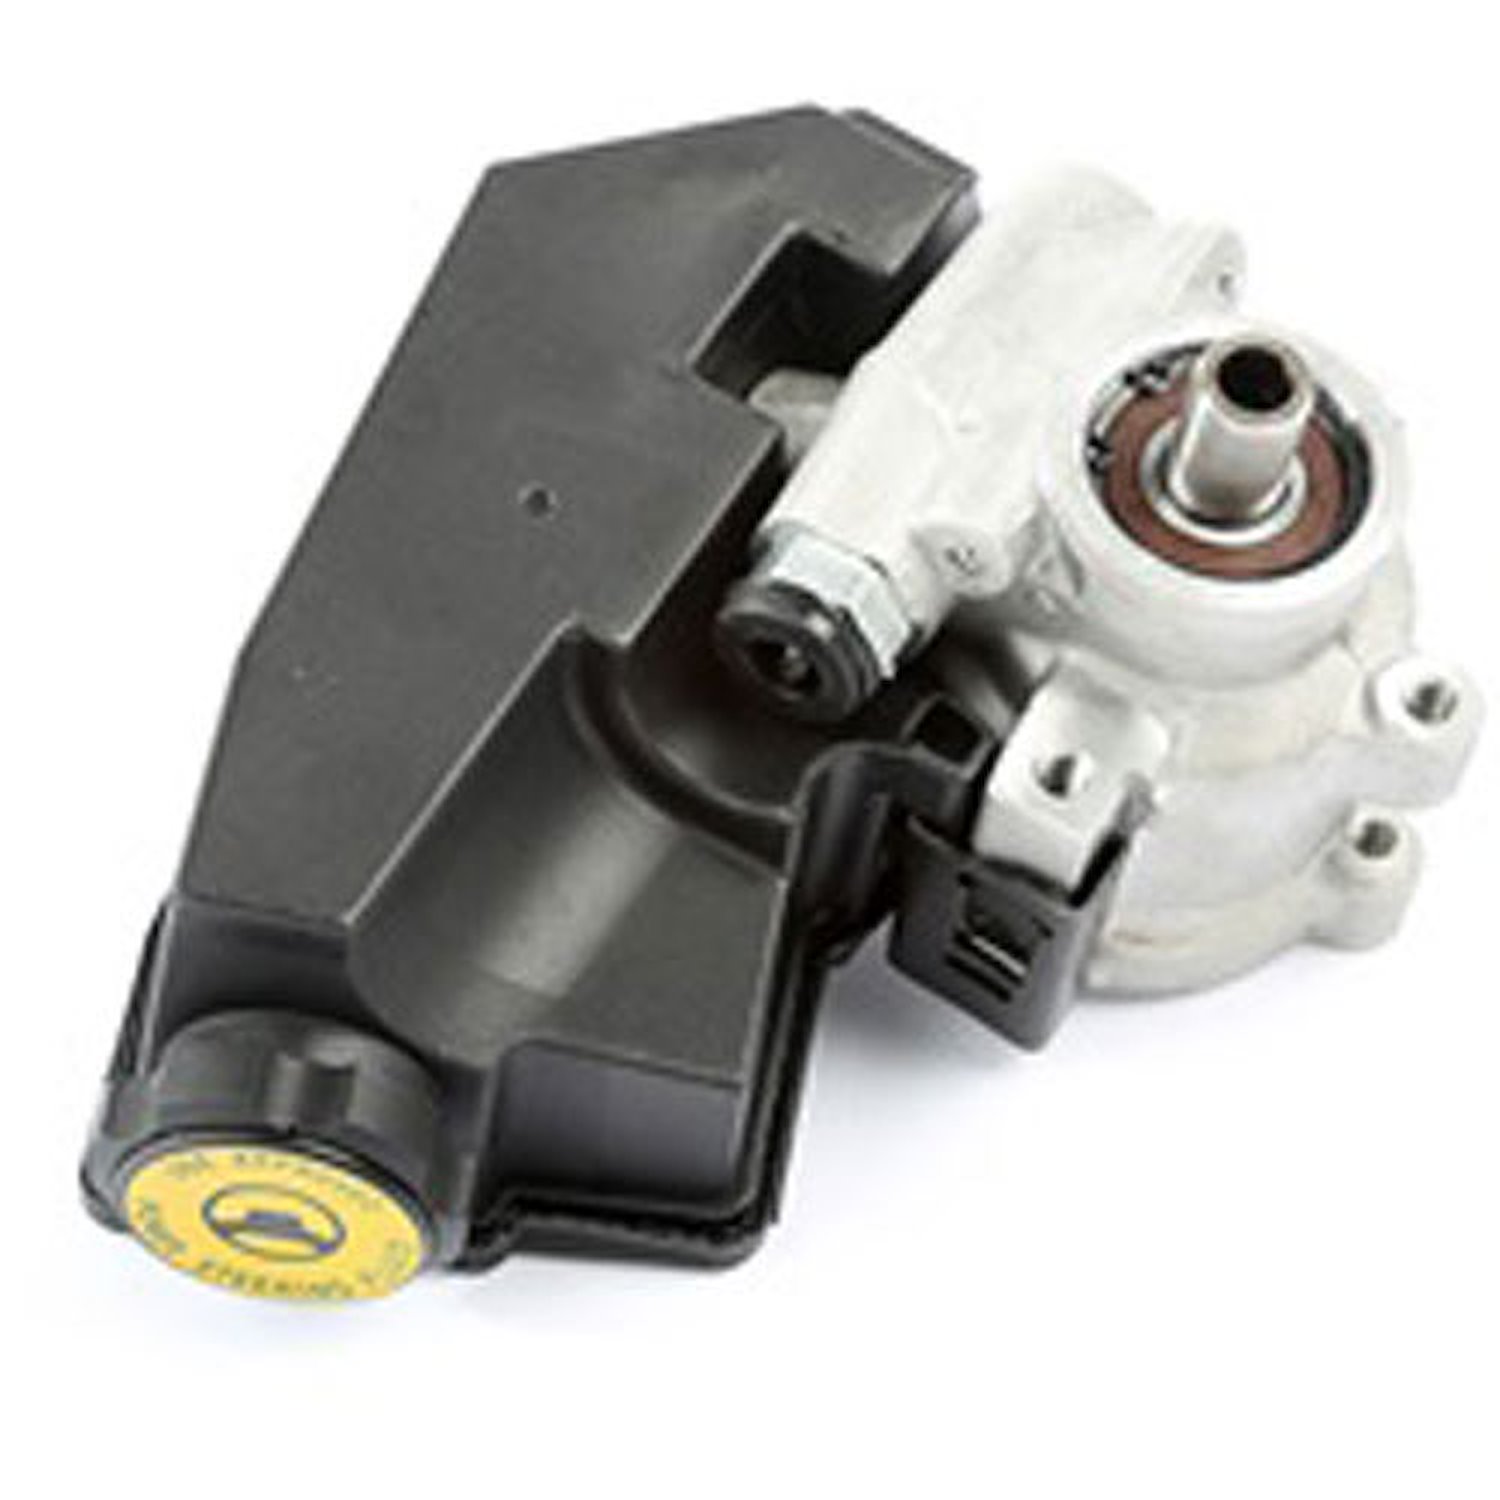 This power steering pump from Omix-ADA fits 87-90 and 96-01 Jeep Cherokees with a 4.0L engine.